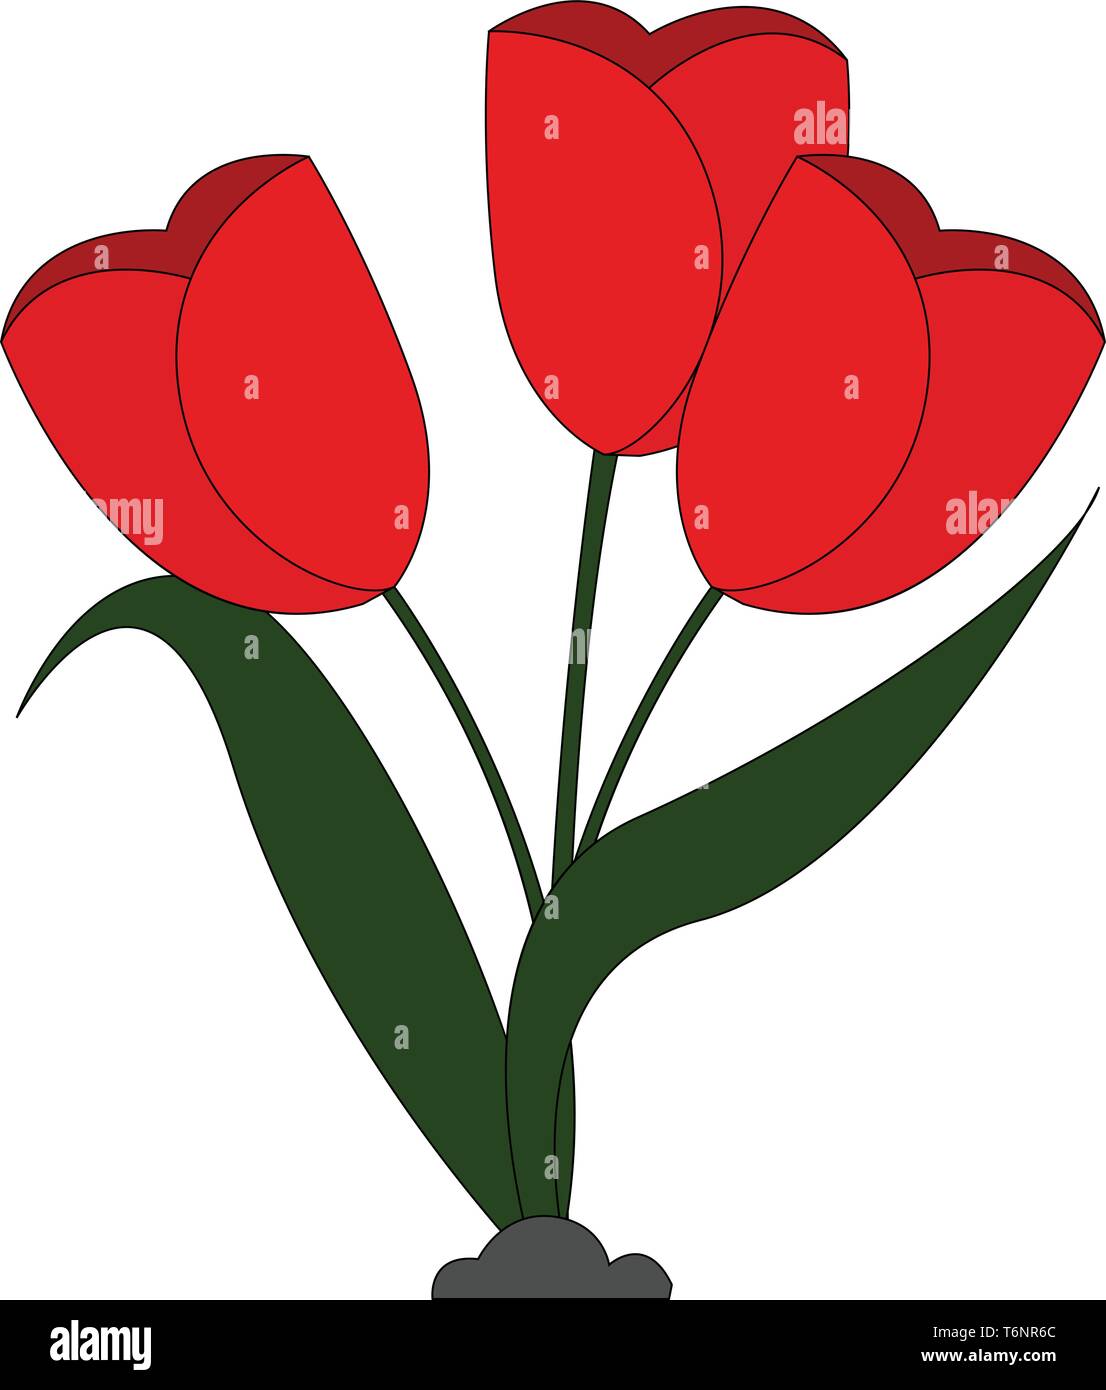 Clipart of beautiful red flowers with elongated green leaves grown above the soil  vector  color drawing or illustration Stock Vector